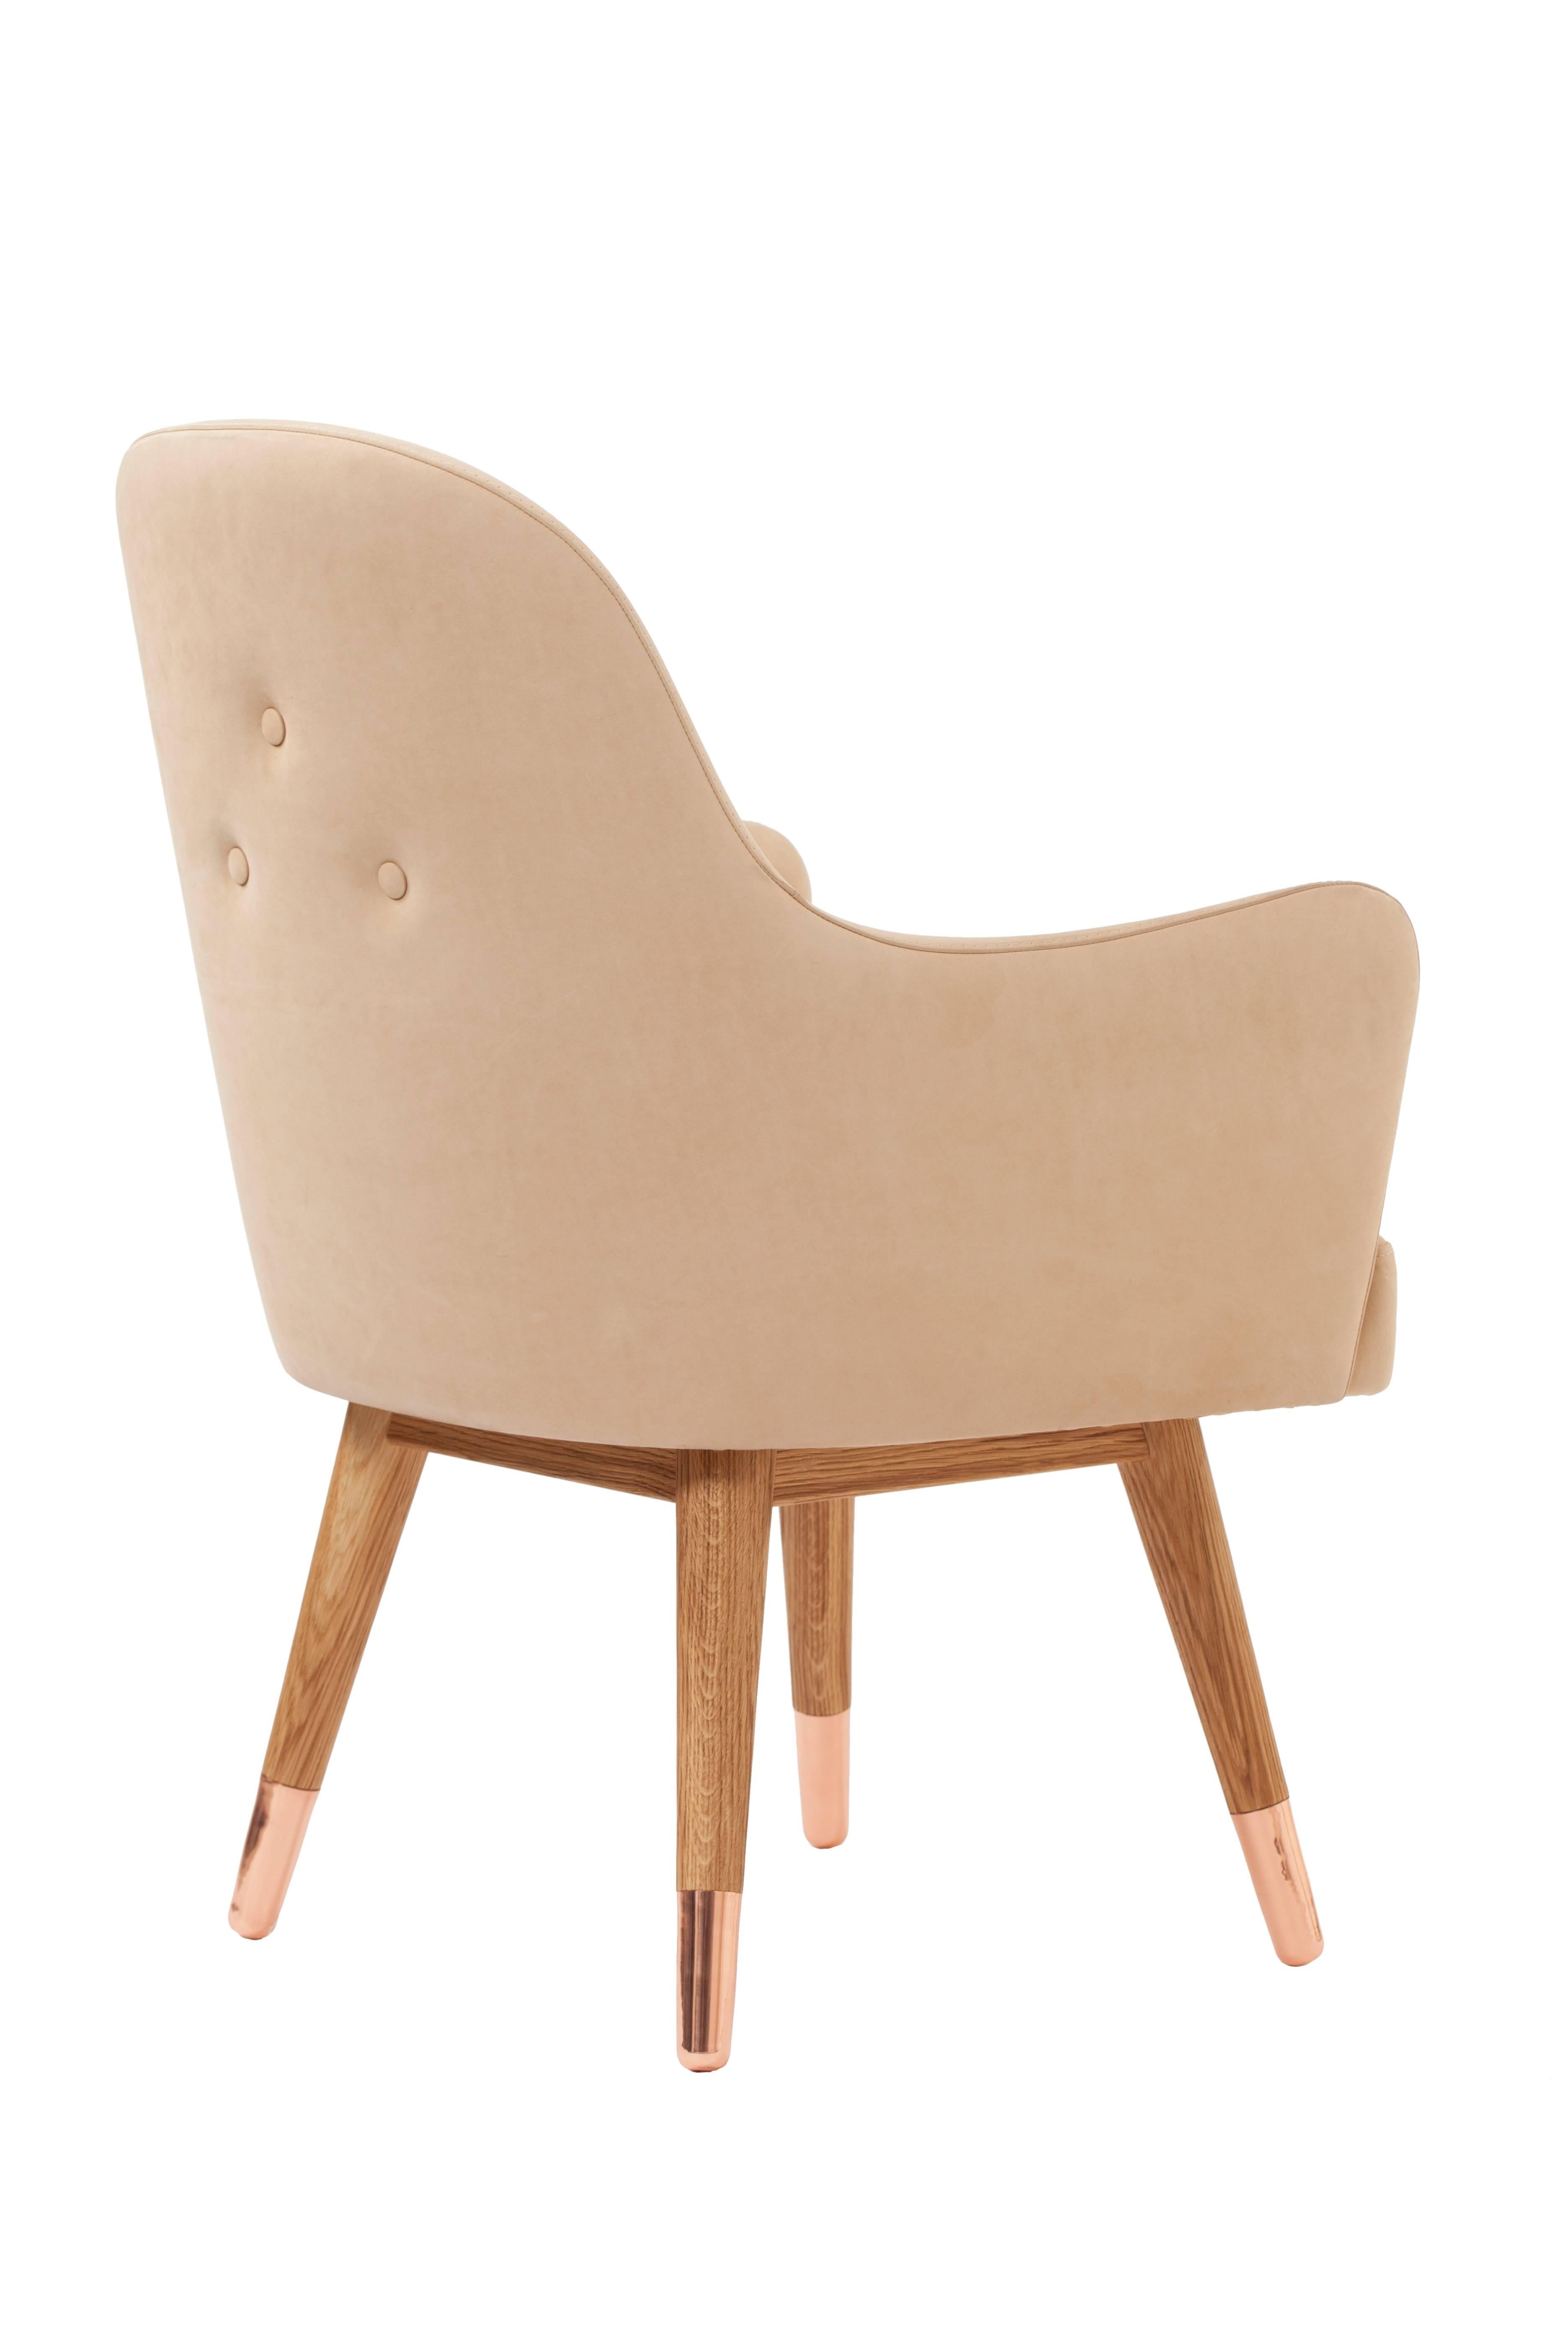 Dandy Beige Suede Leather Chair with American White Oak and Polished Copper im Zustand „Neu“ im Angebot in Firenze, IT